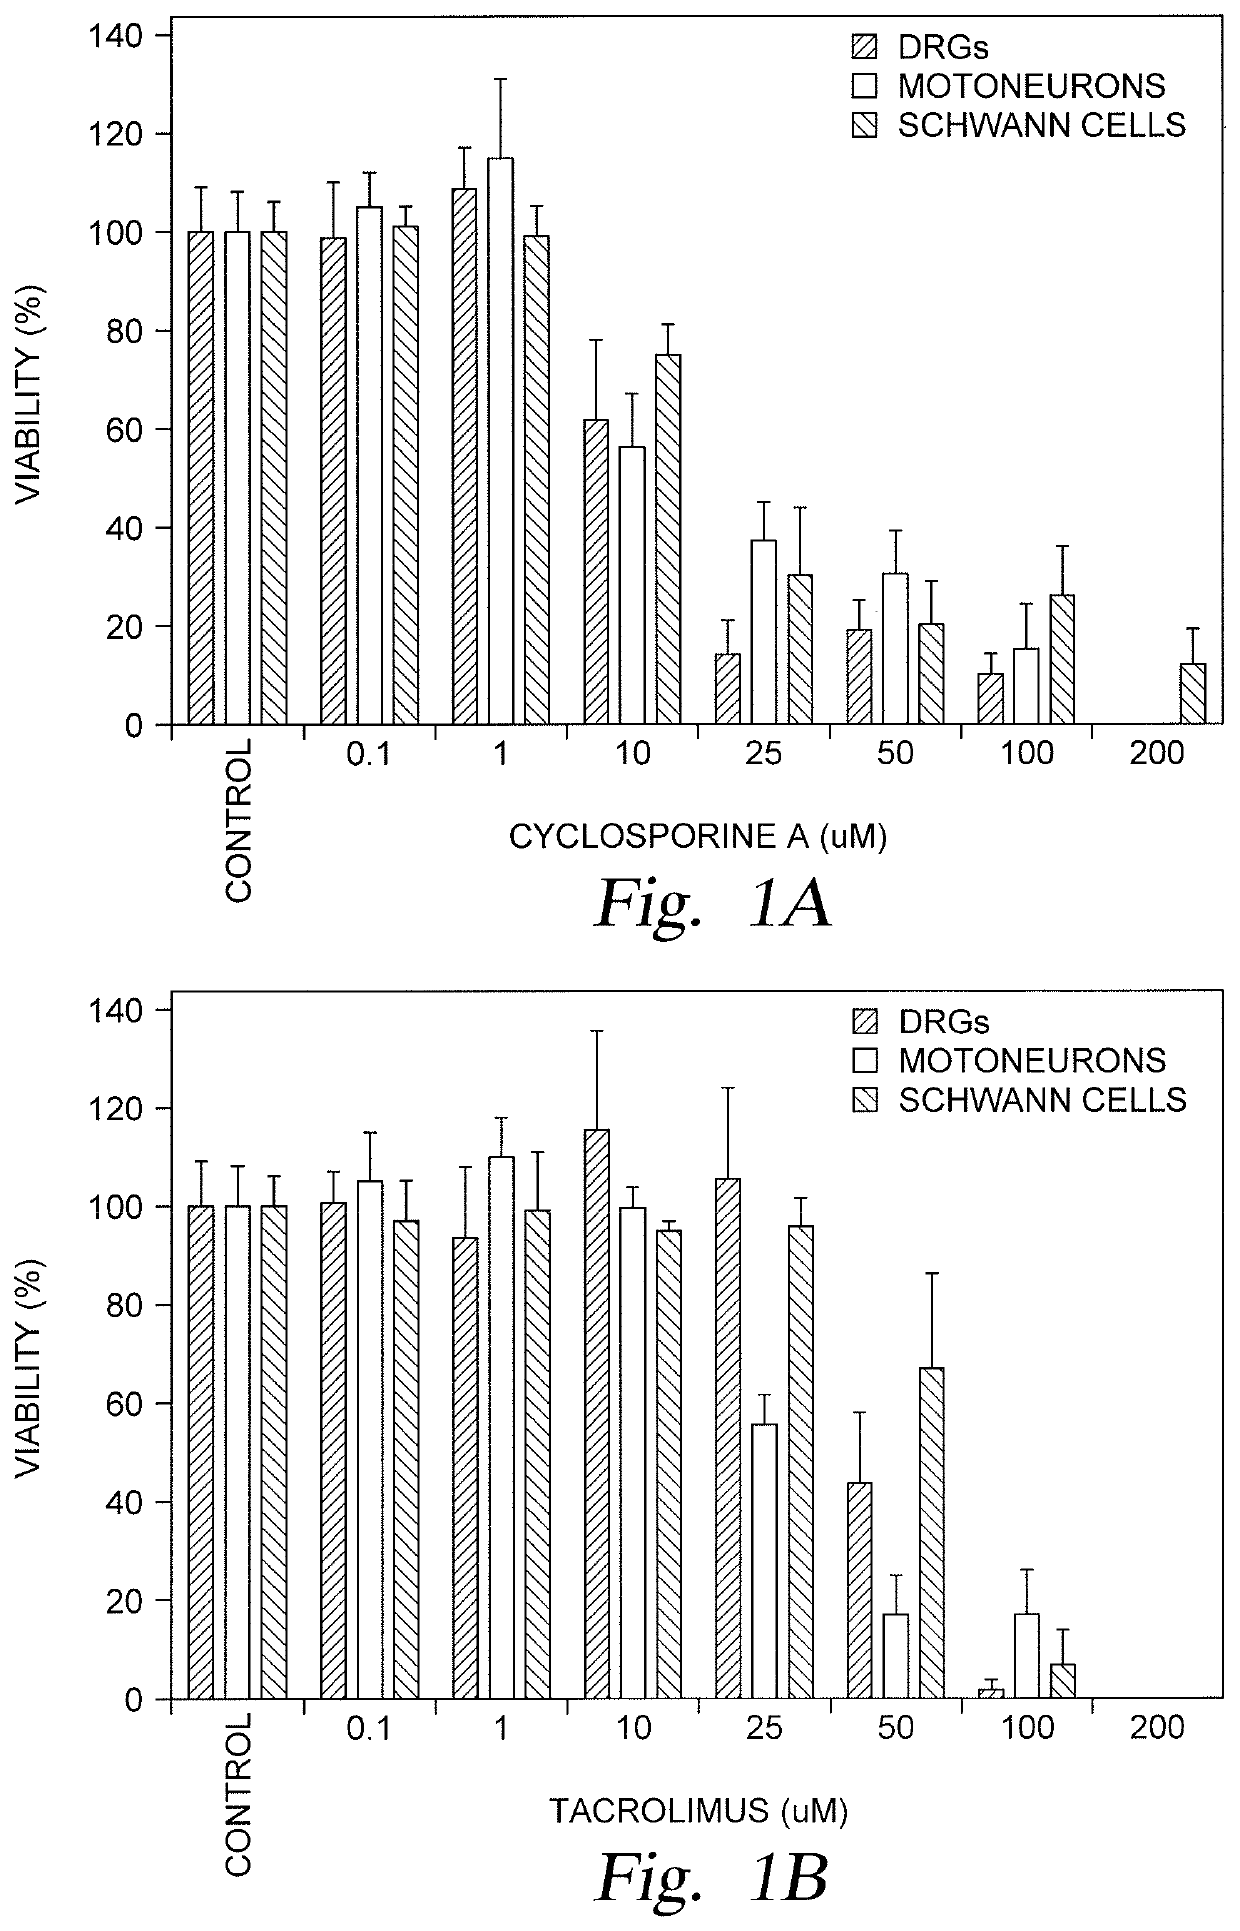 Localized immunosuppression of allografts for peripheral nerve repair